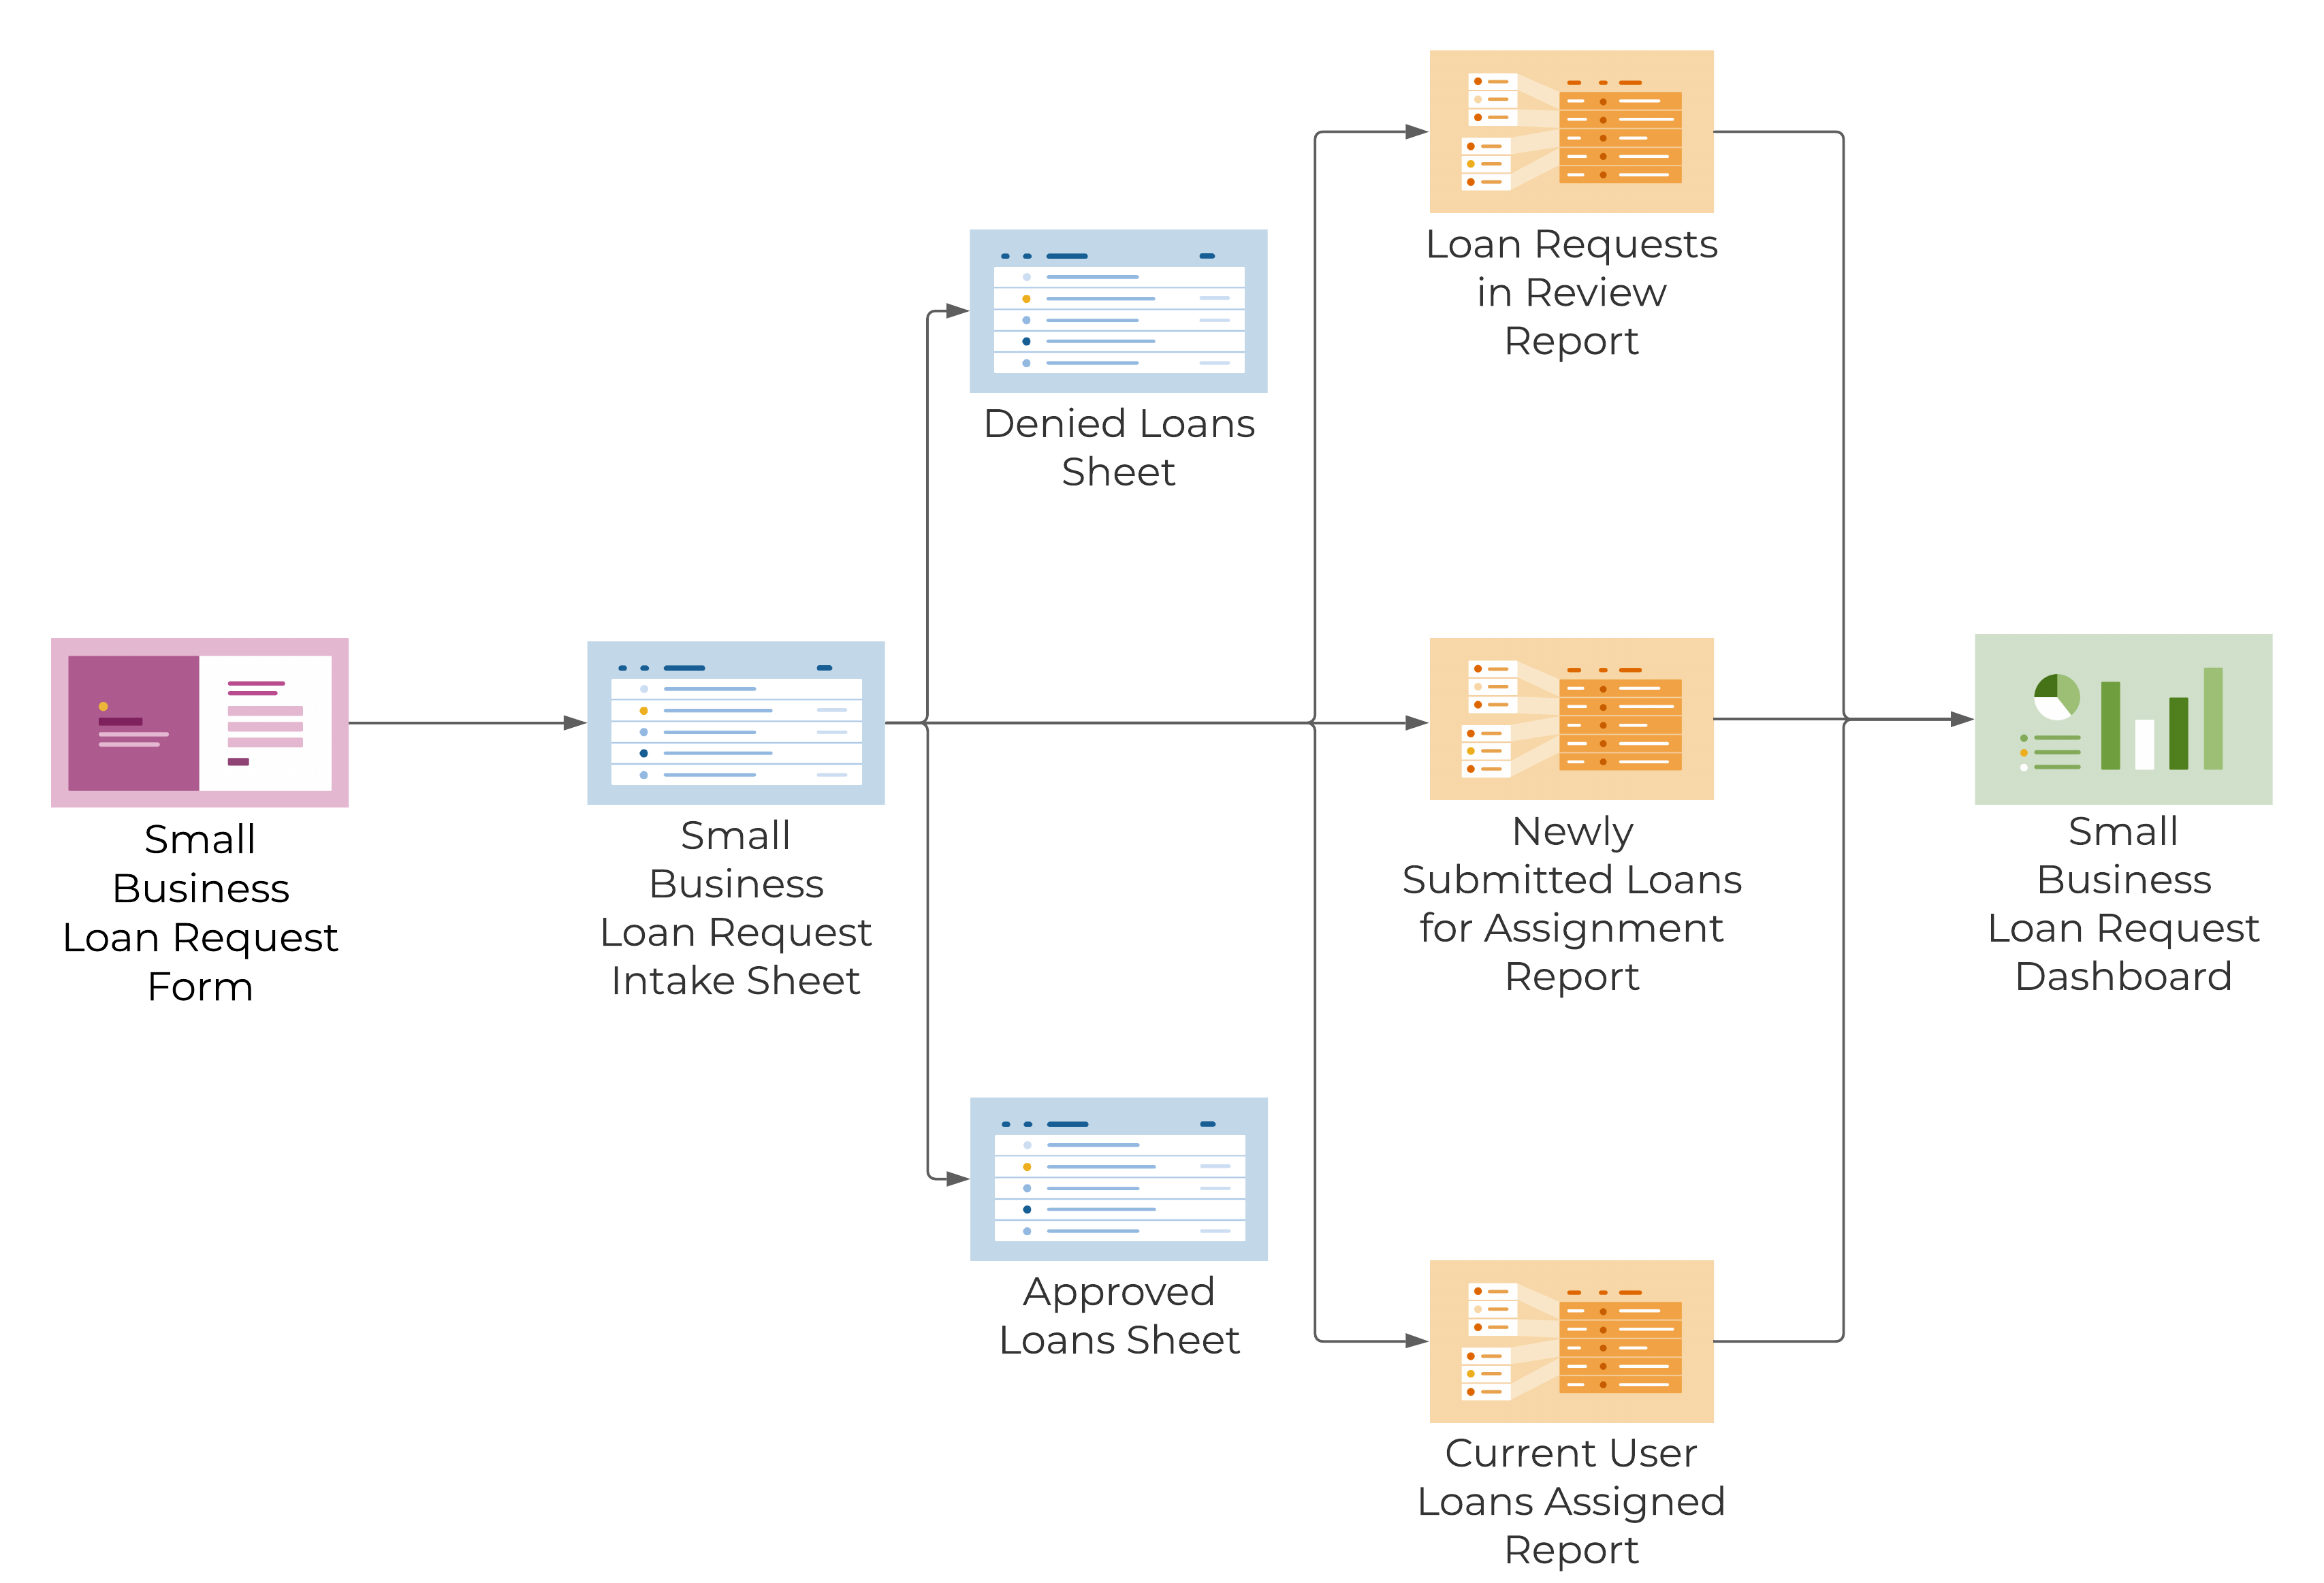 Template Set Flow Chart - Small Business Loan Requests